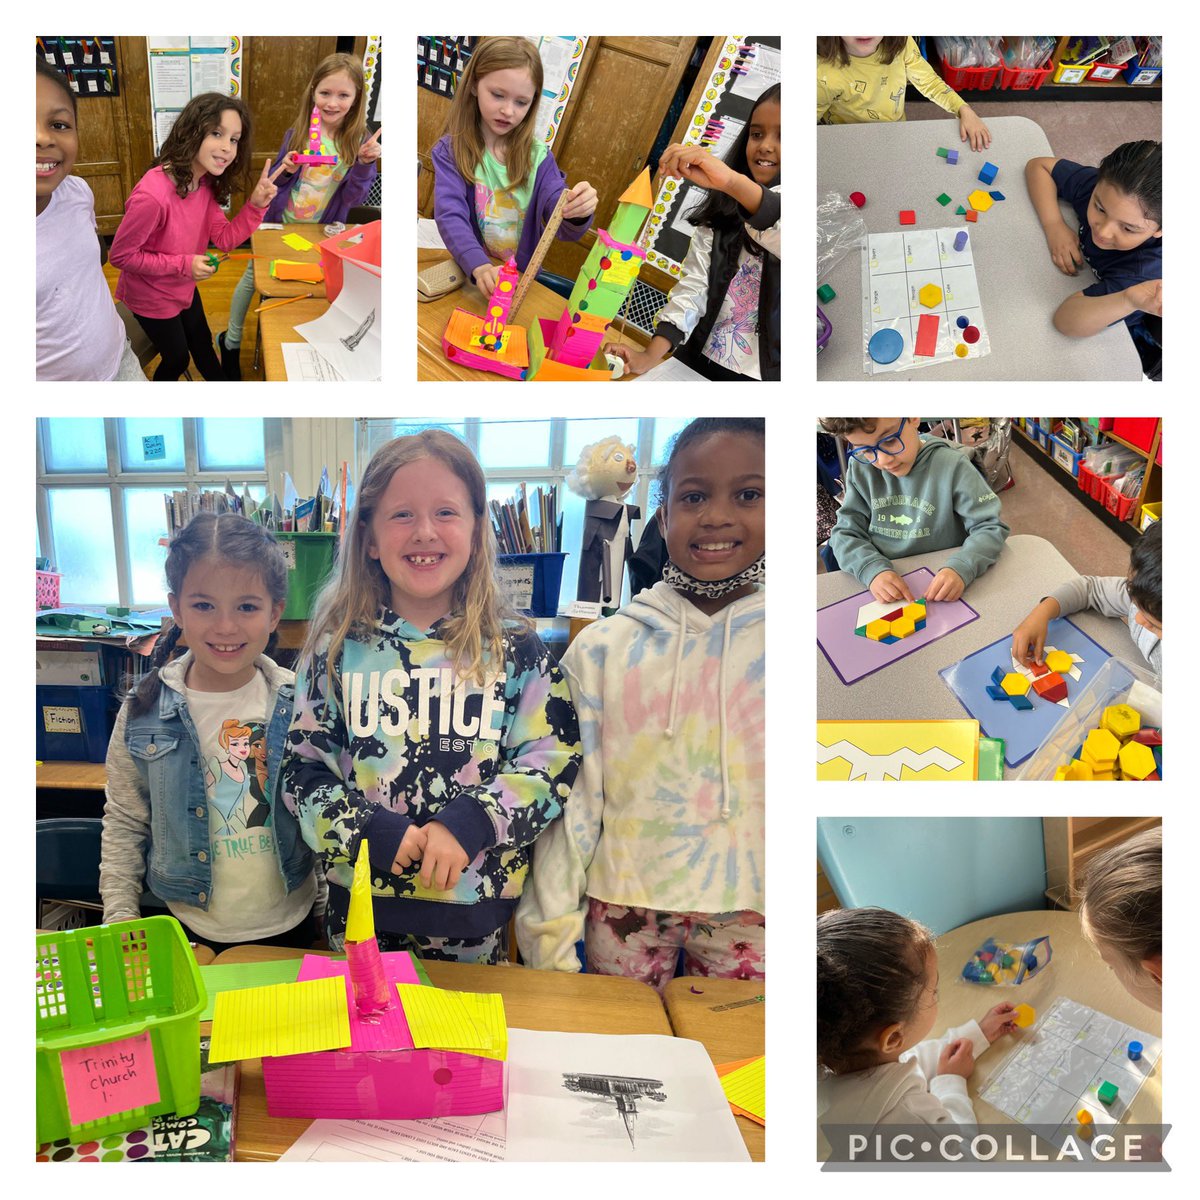 Math morning was a great success! Thank you to all the families that attended. #geometry #measurementanddata #STEM @DrMarionWilson @CChavezD31 @D31DSPalton